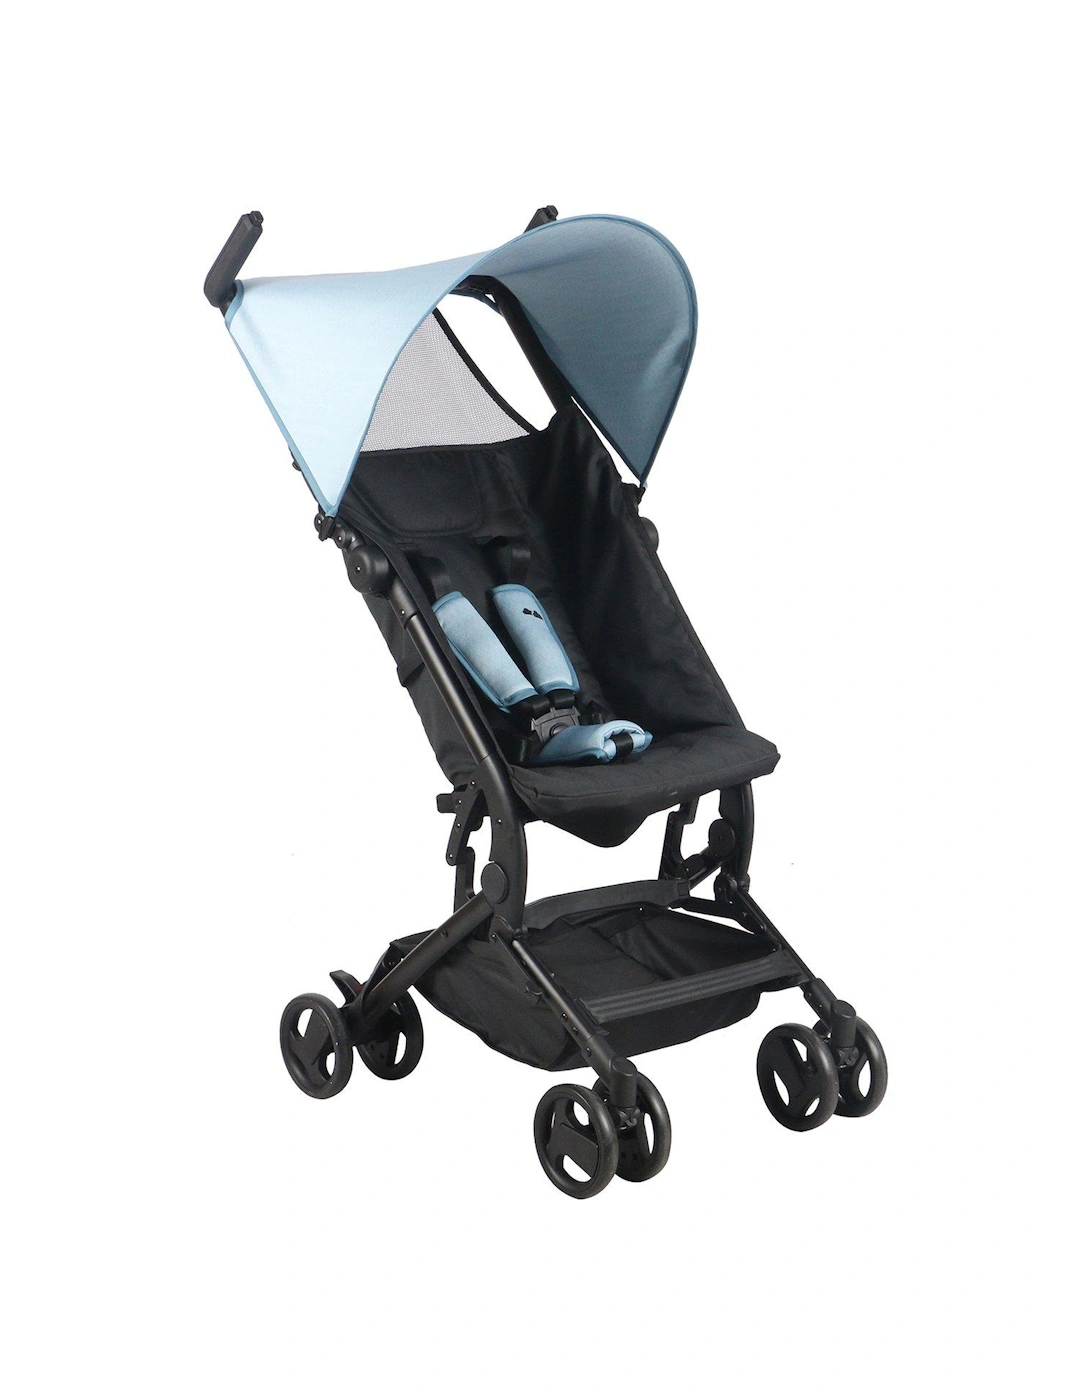 MBX5 Ultra Compact Stroller - Blue, 2 of 1